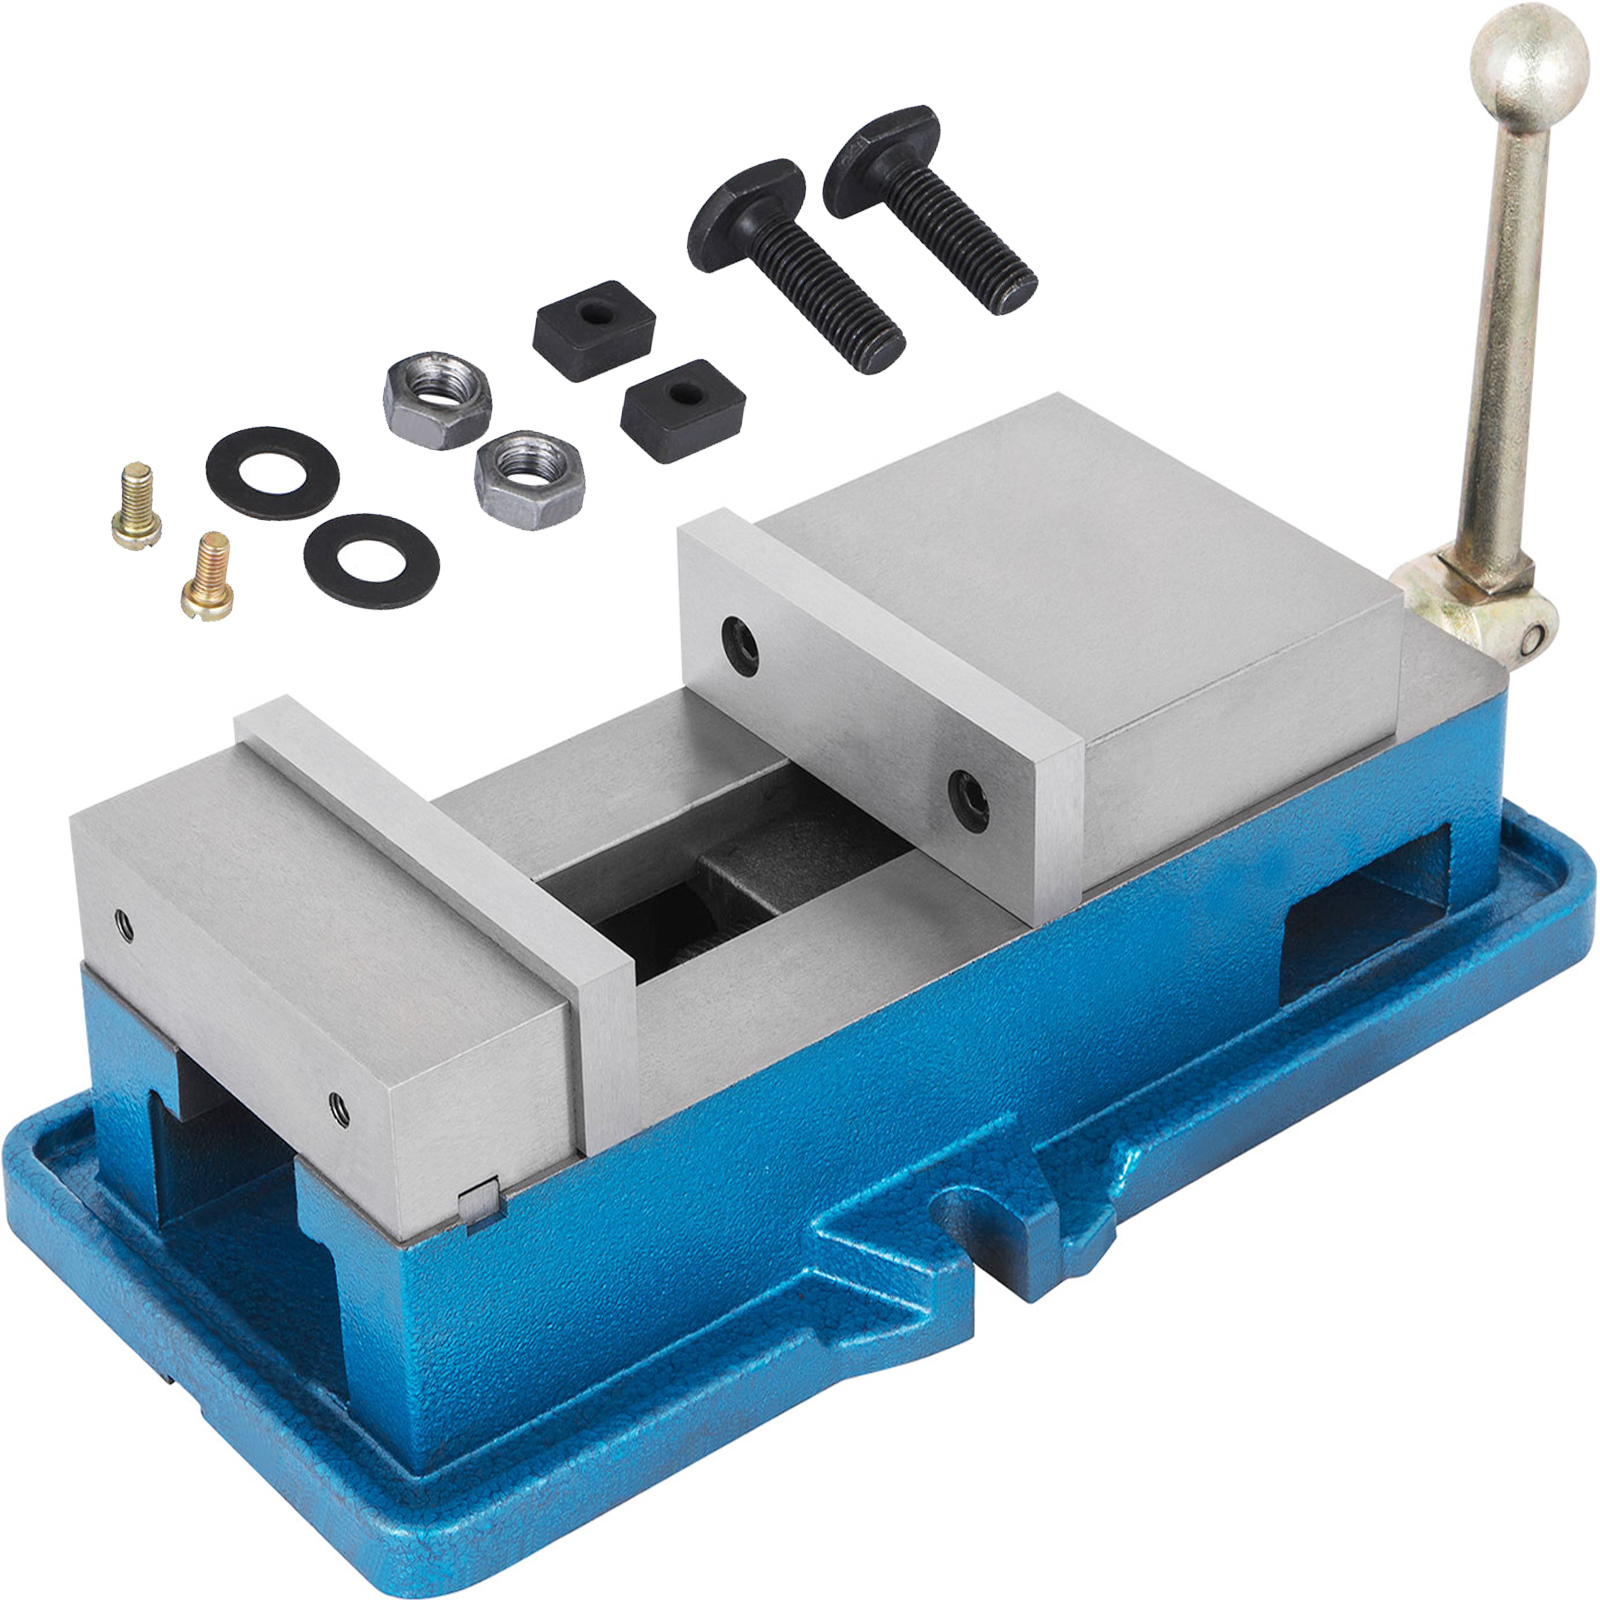 milling drilling vise,bench clamp vise,5 Inch